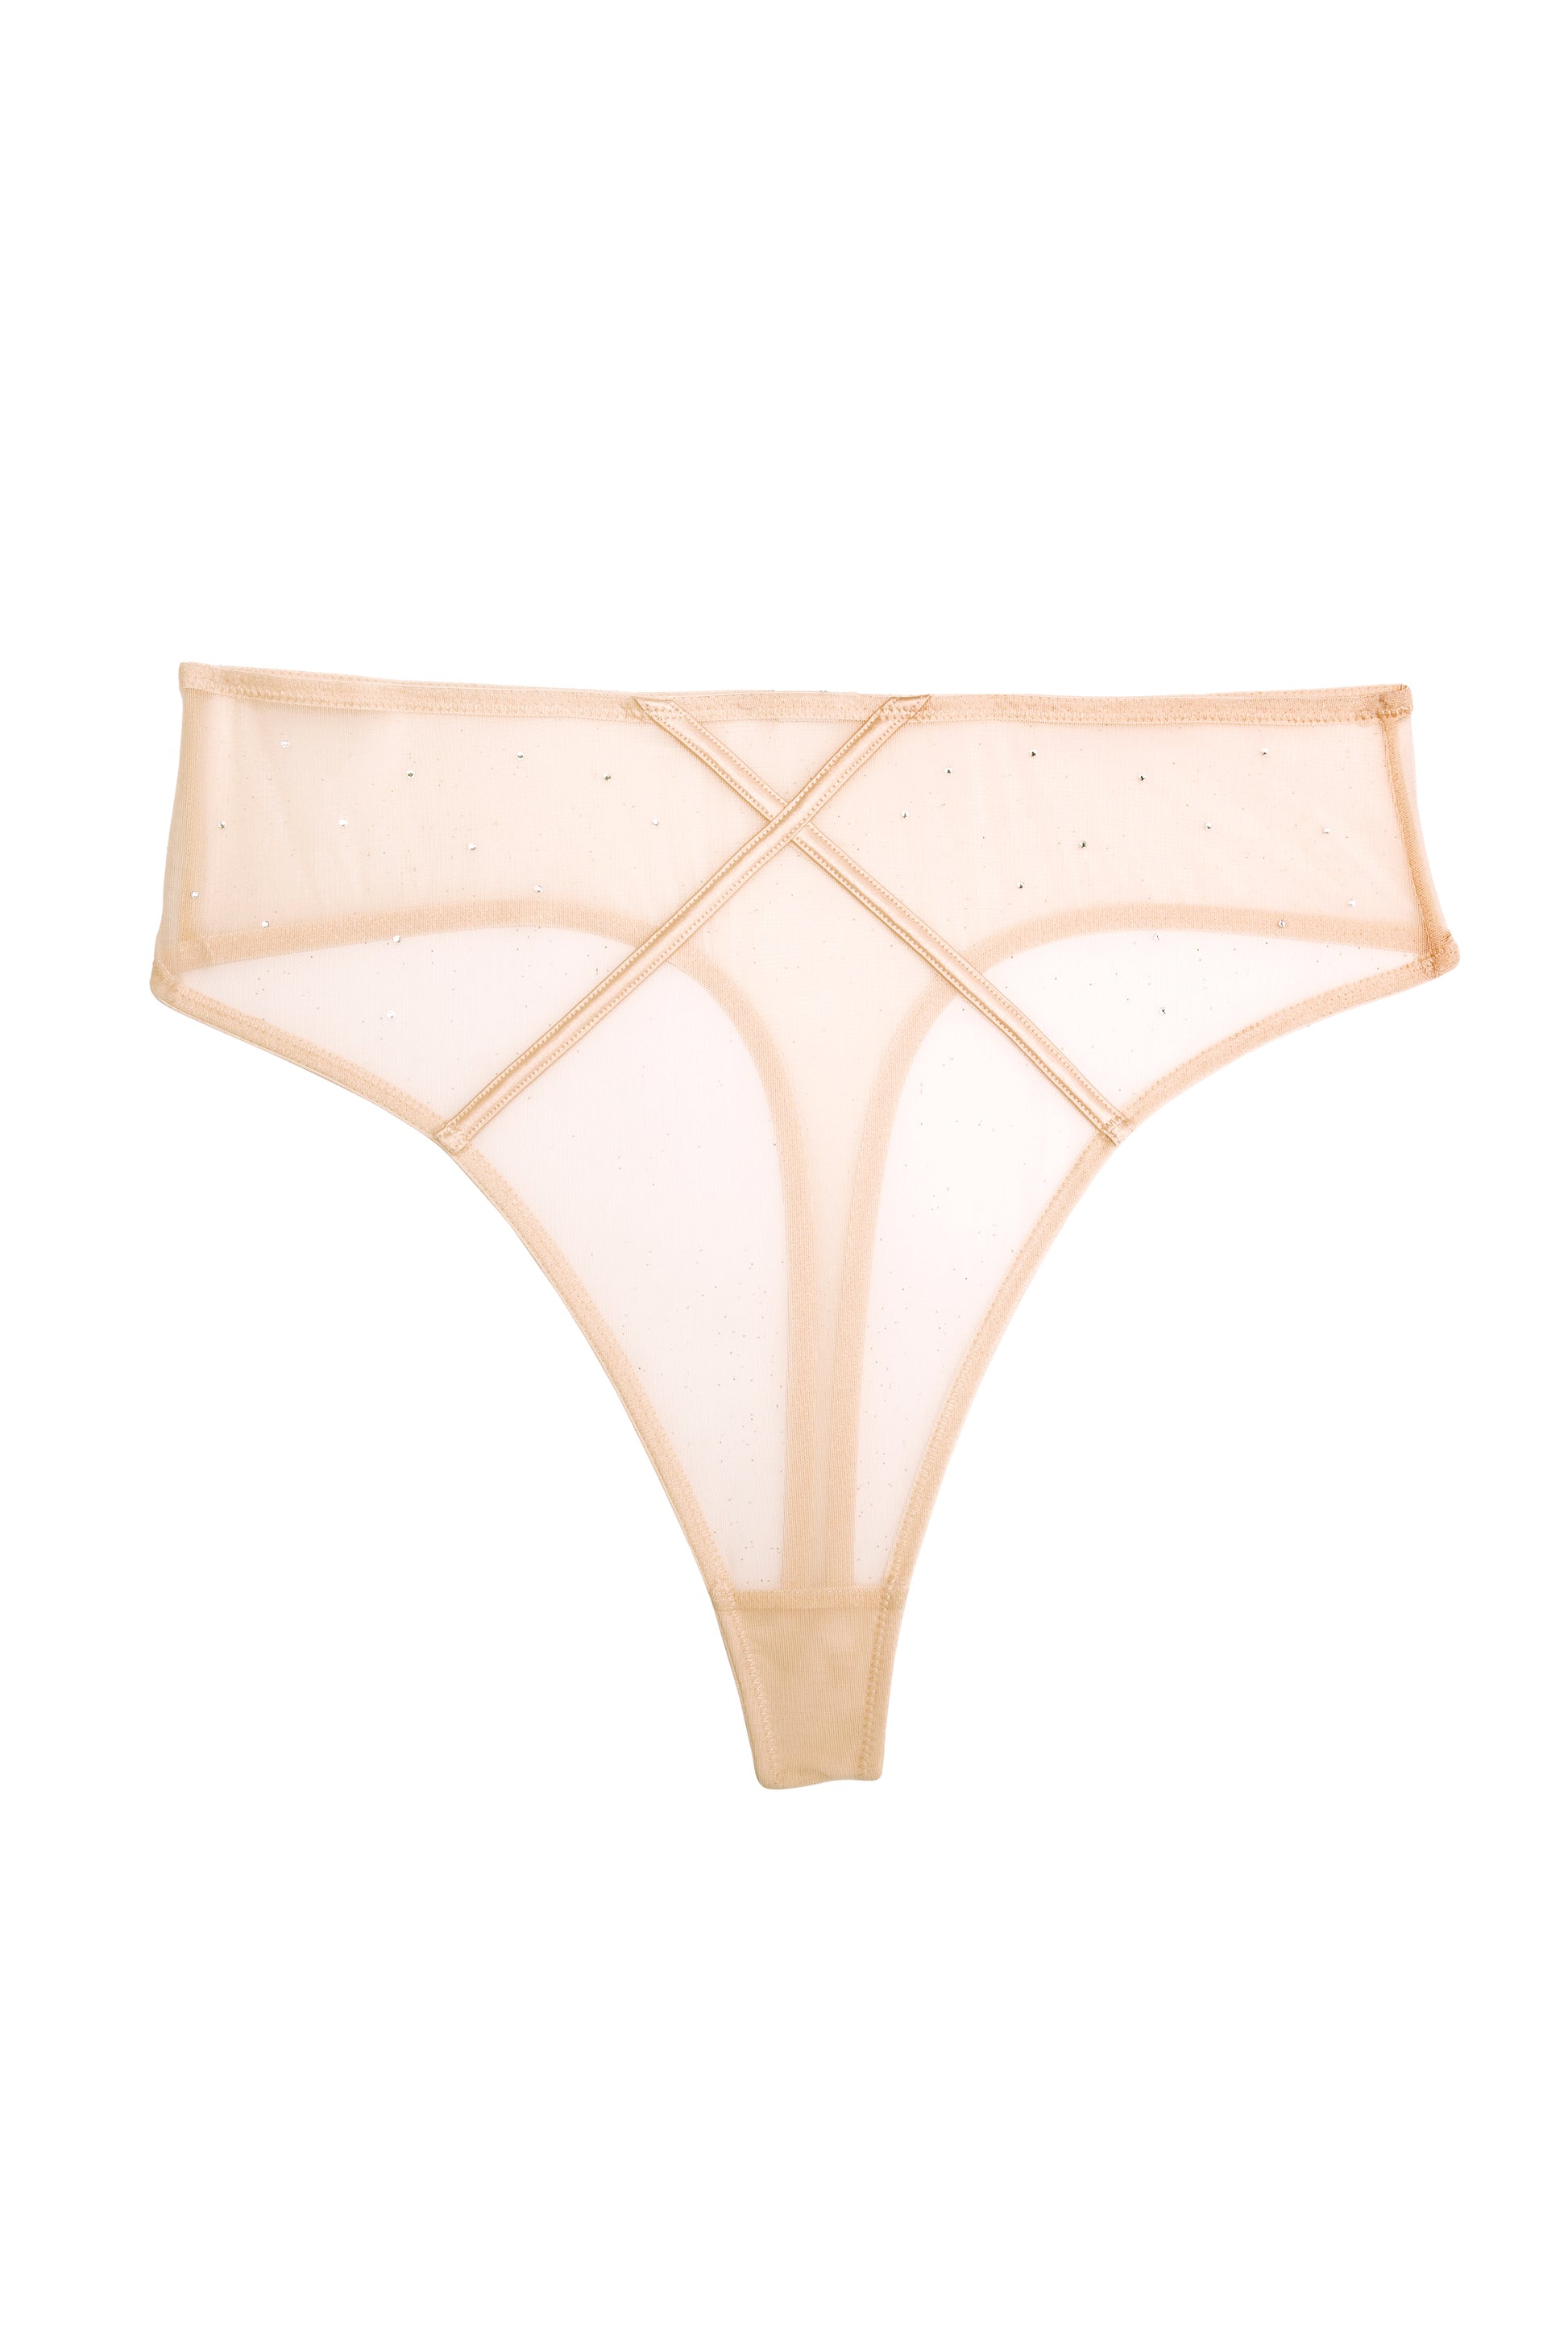 Nola Toffee Diamante High Thong - Playful Promises - Canada